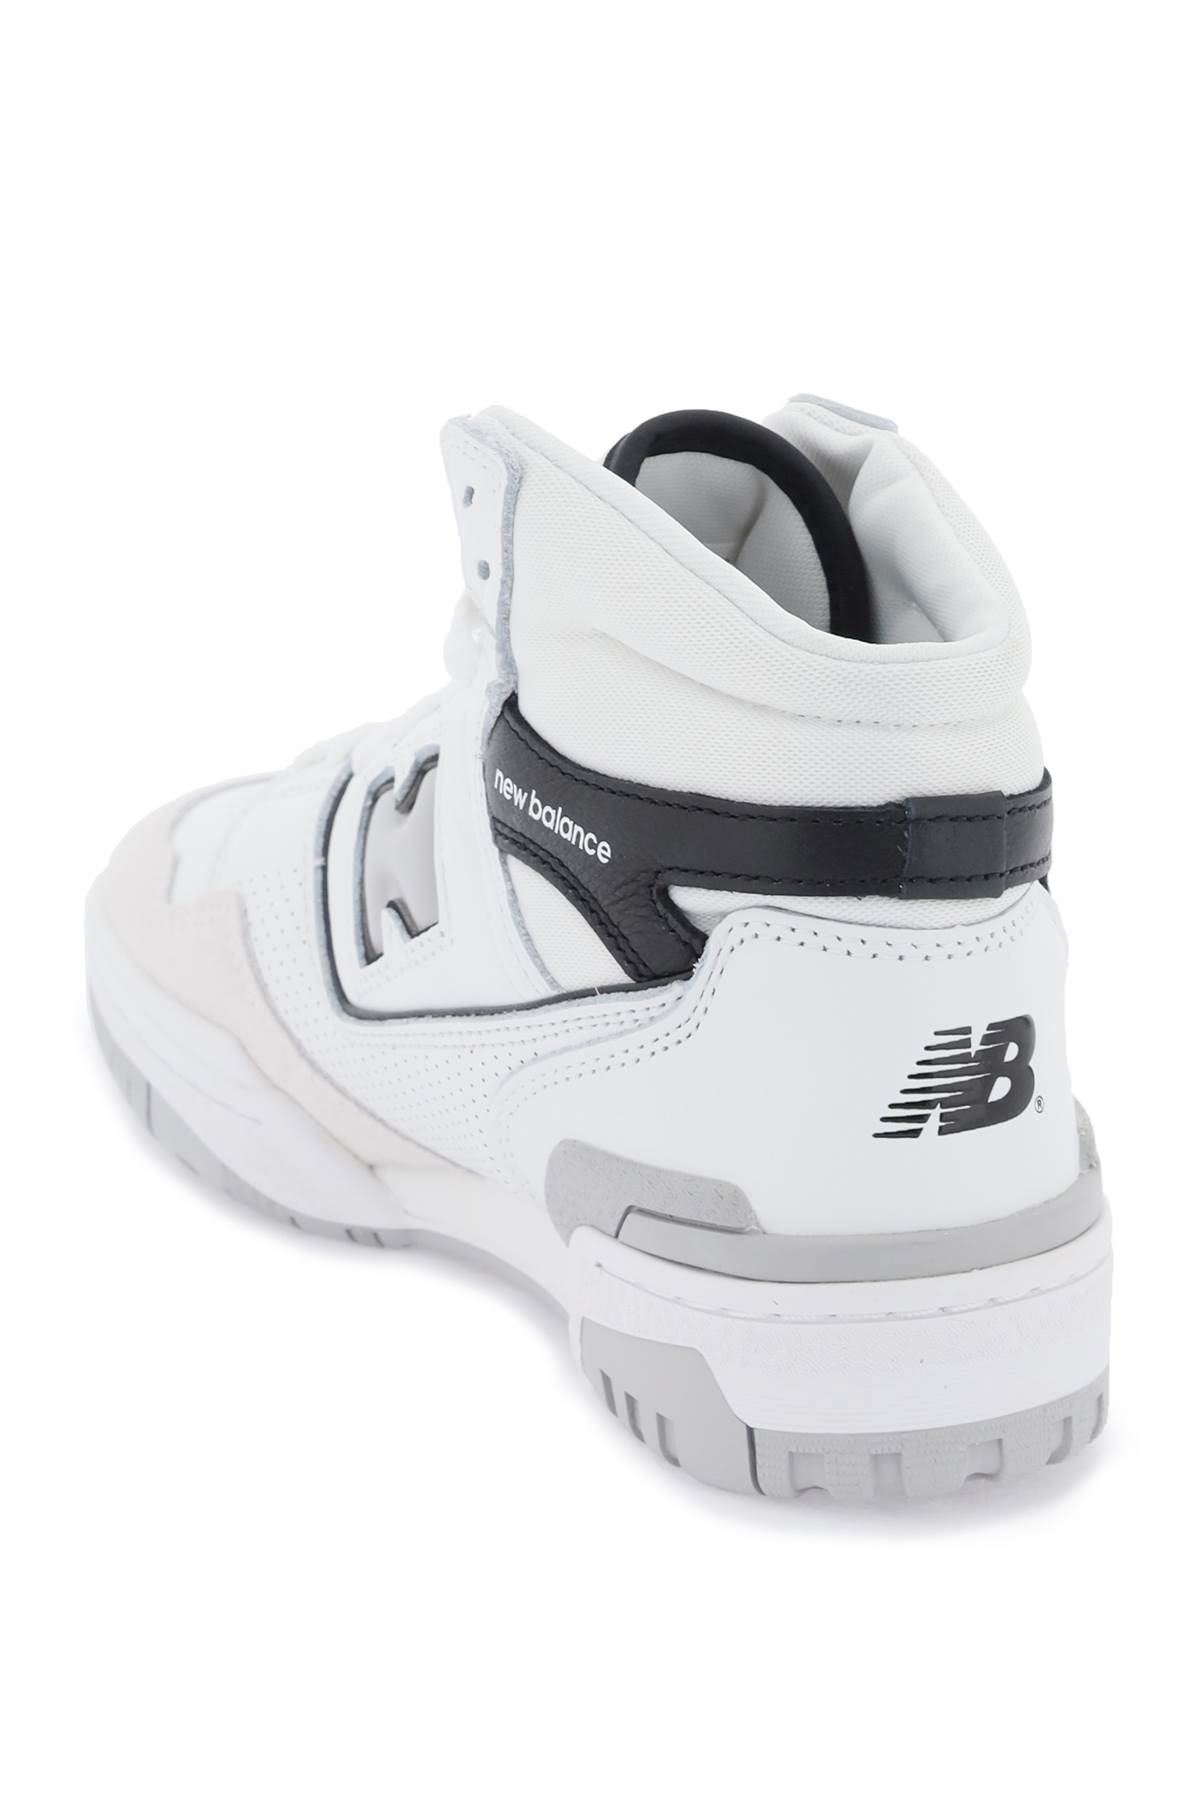 Shop New Balance 650 Sneakers In White Black (white)